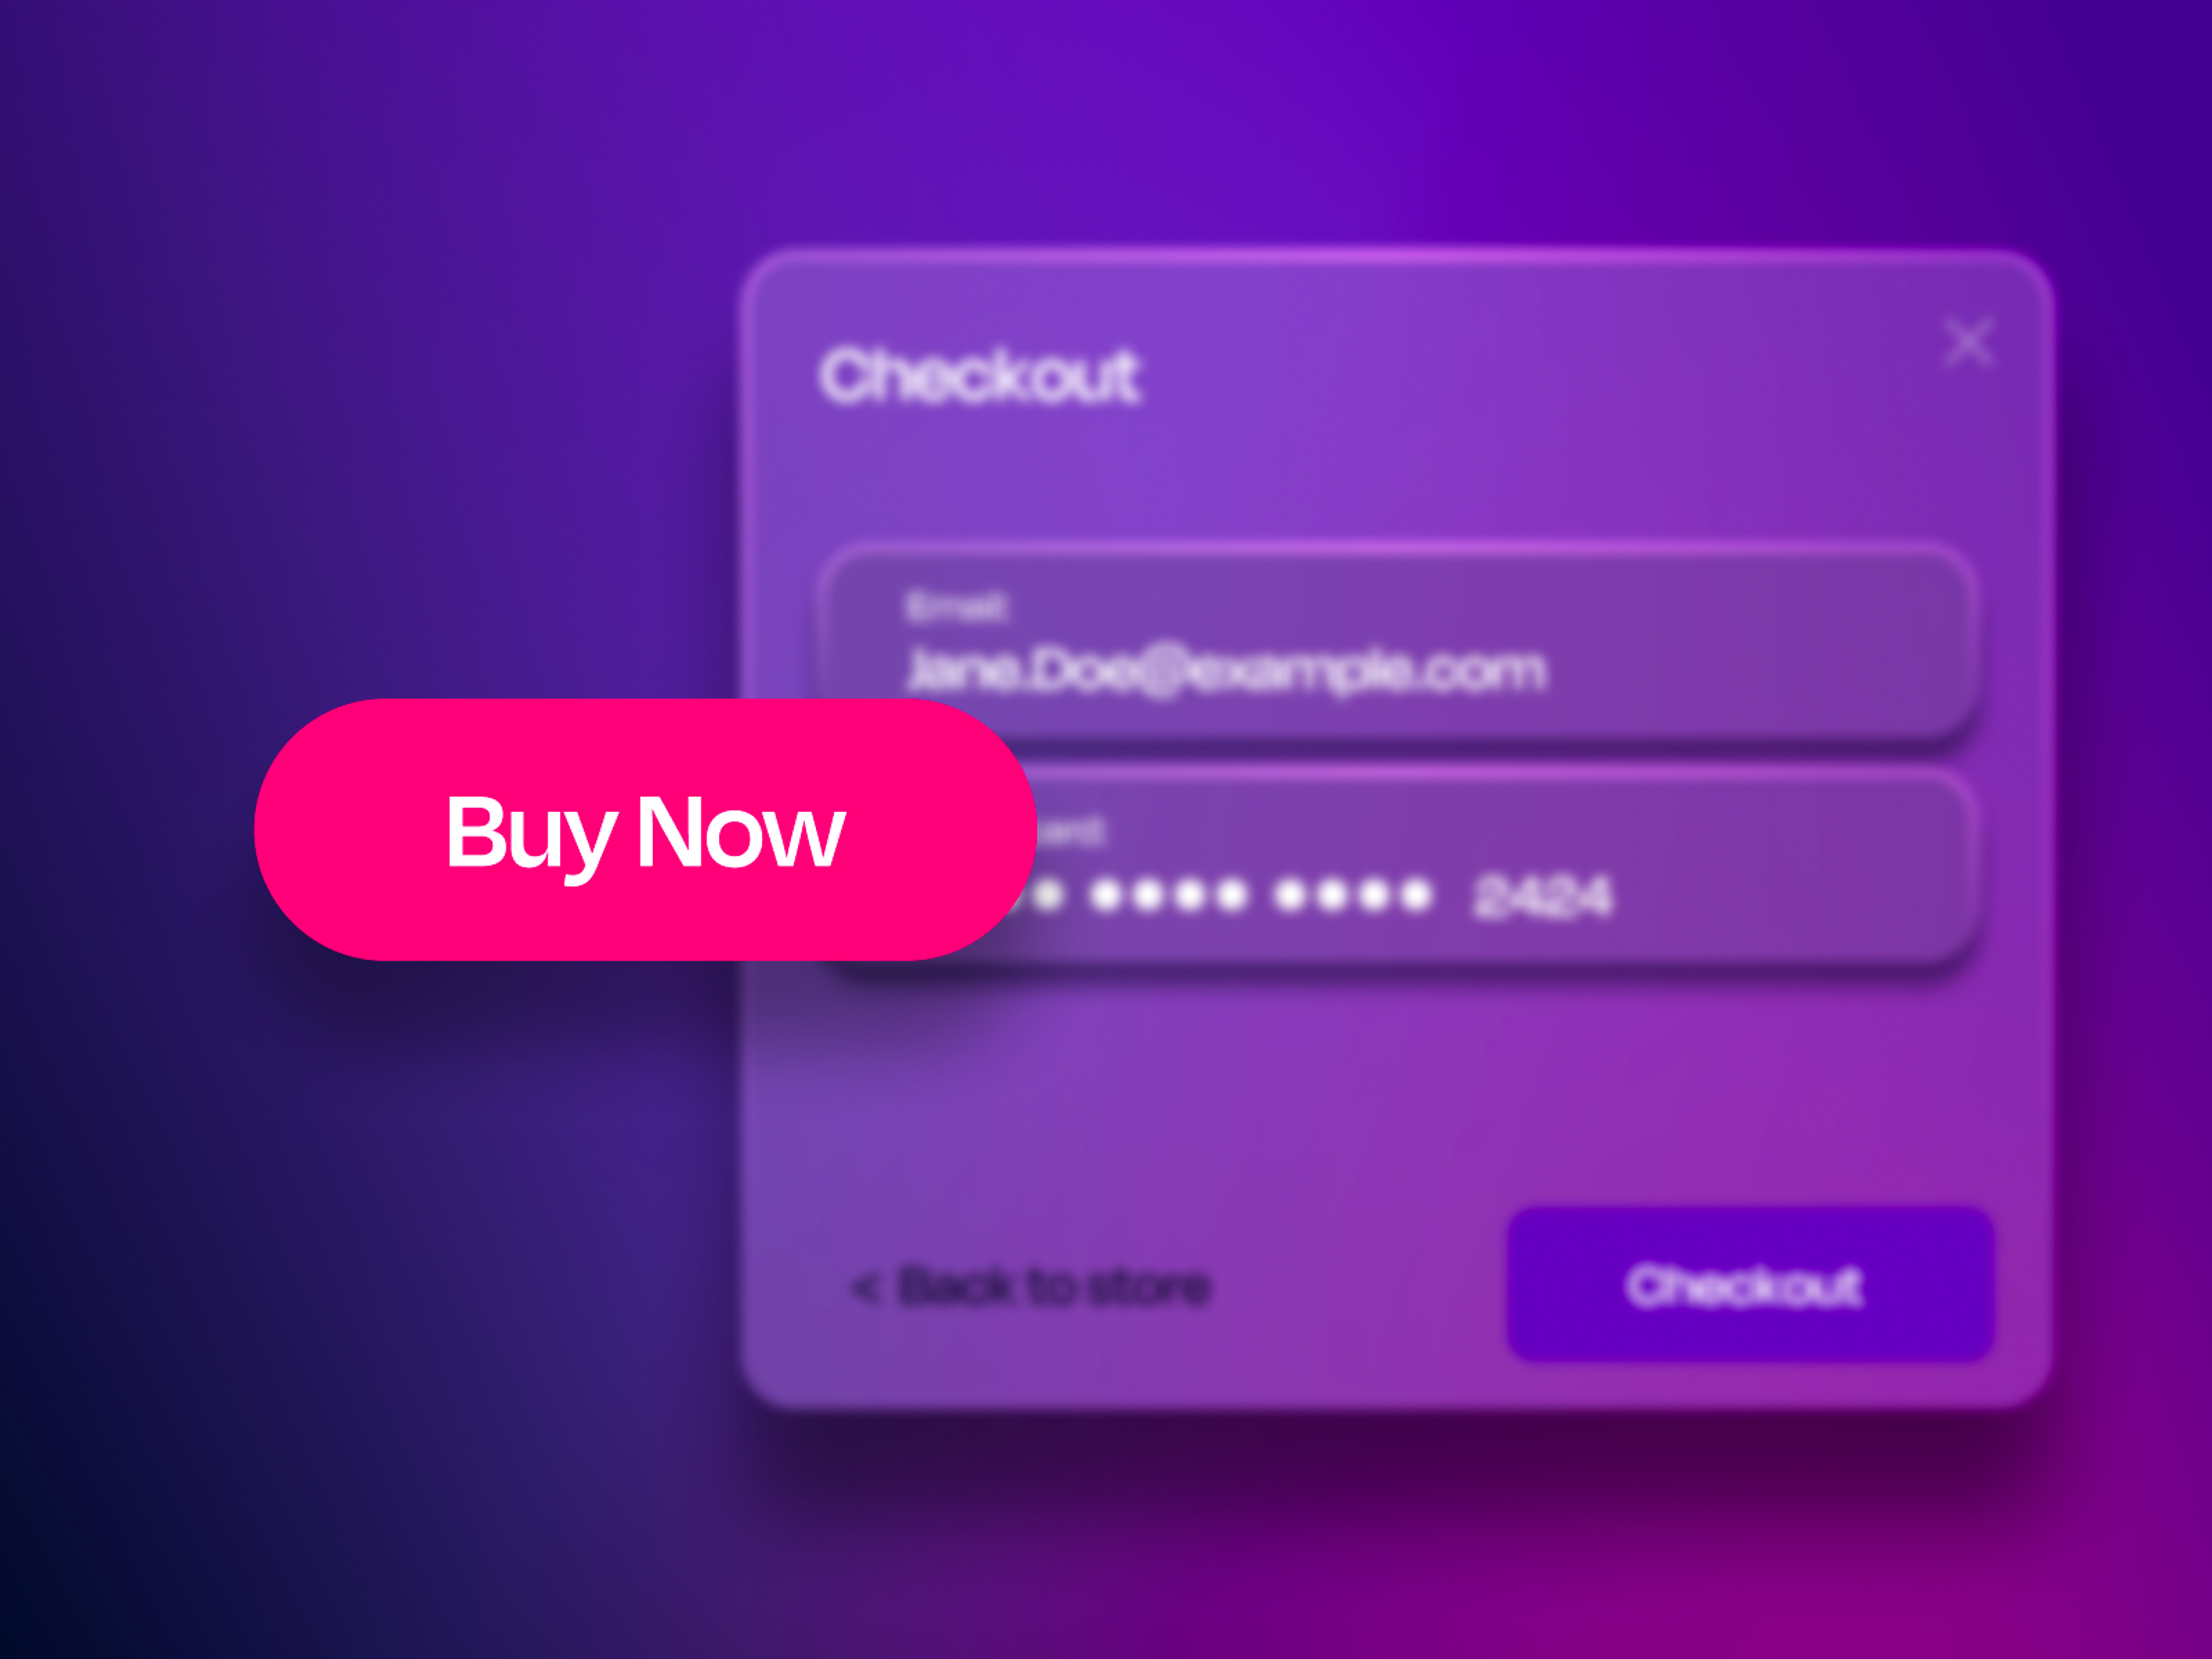 A buy now button that triggers a checkout